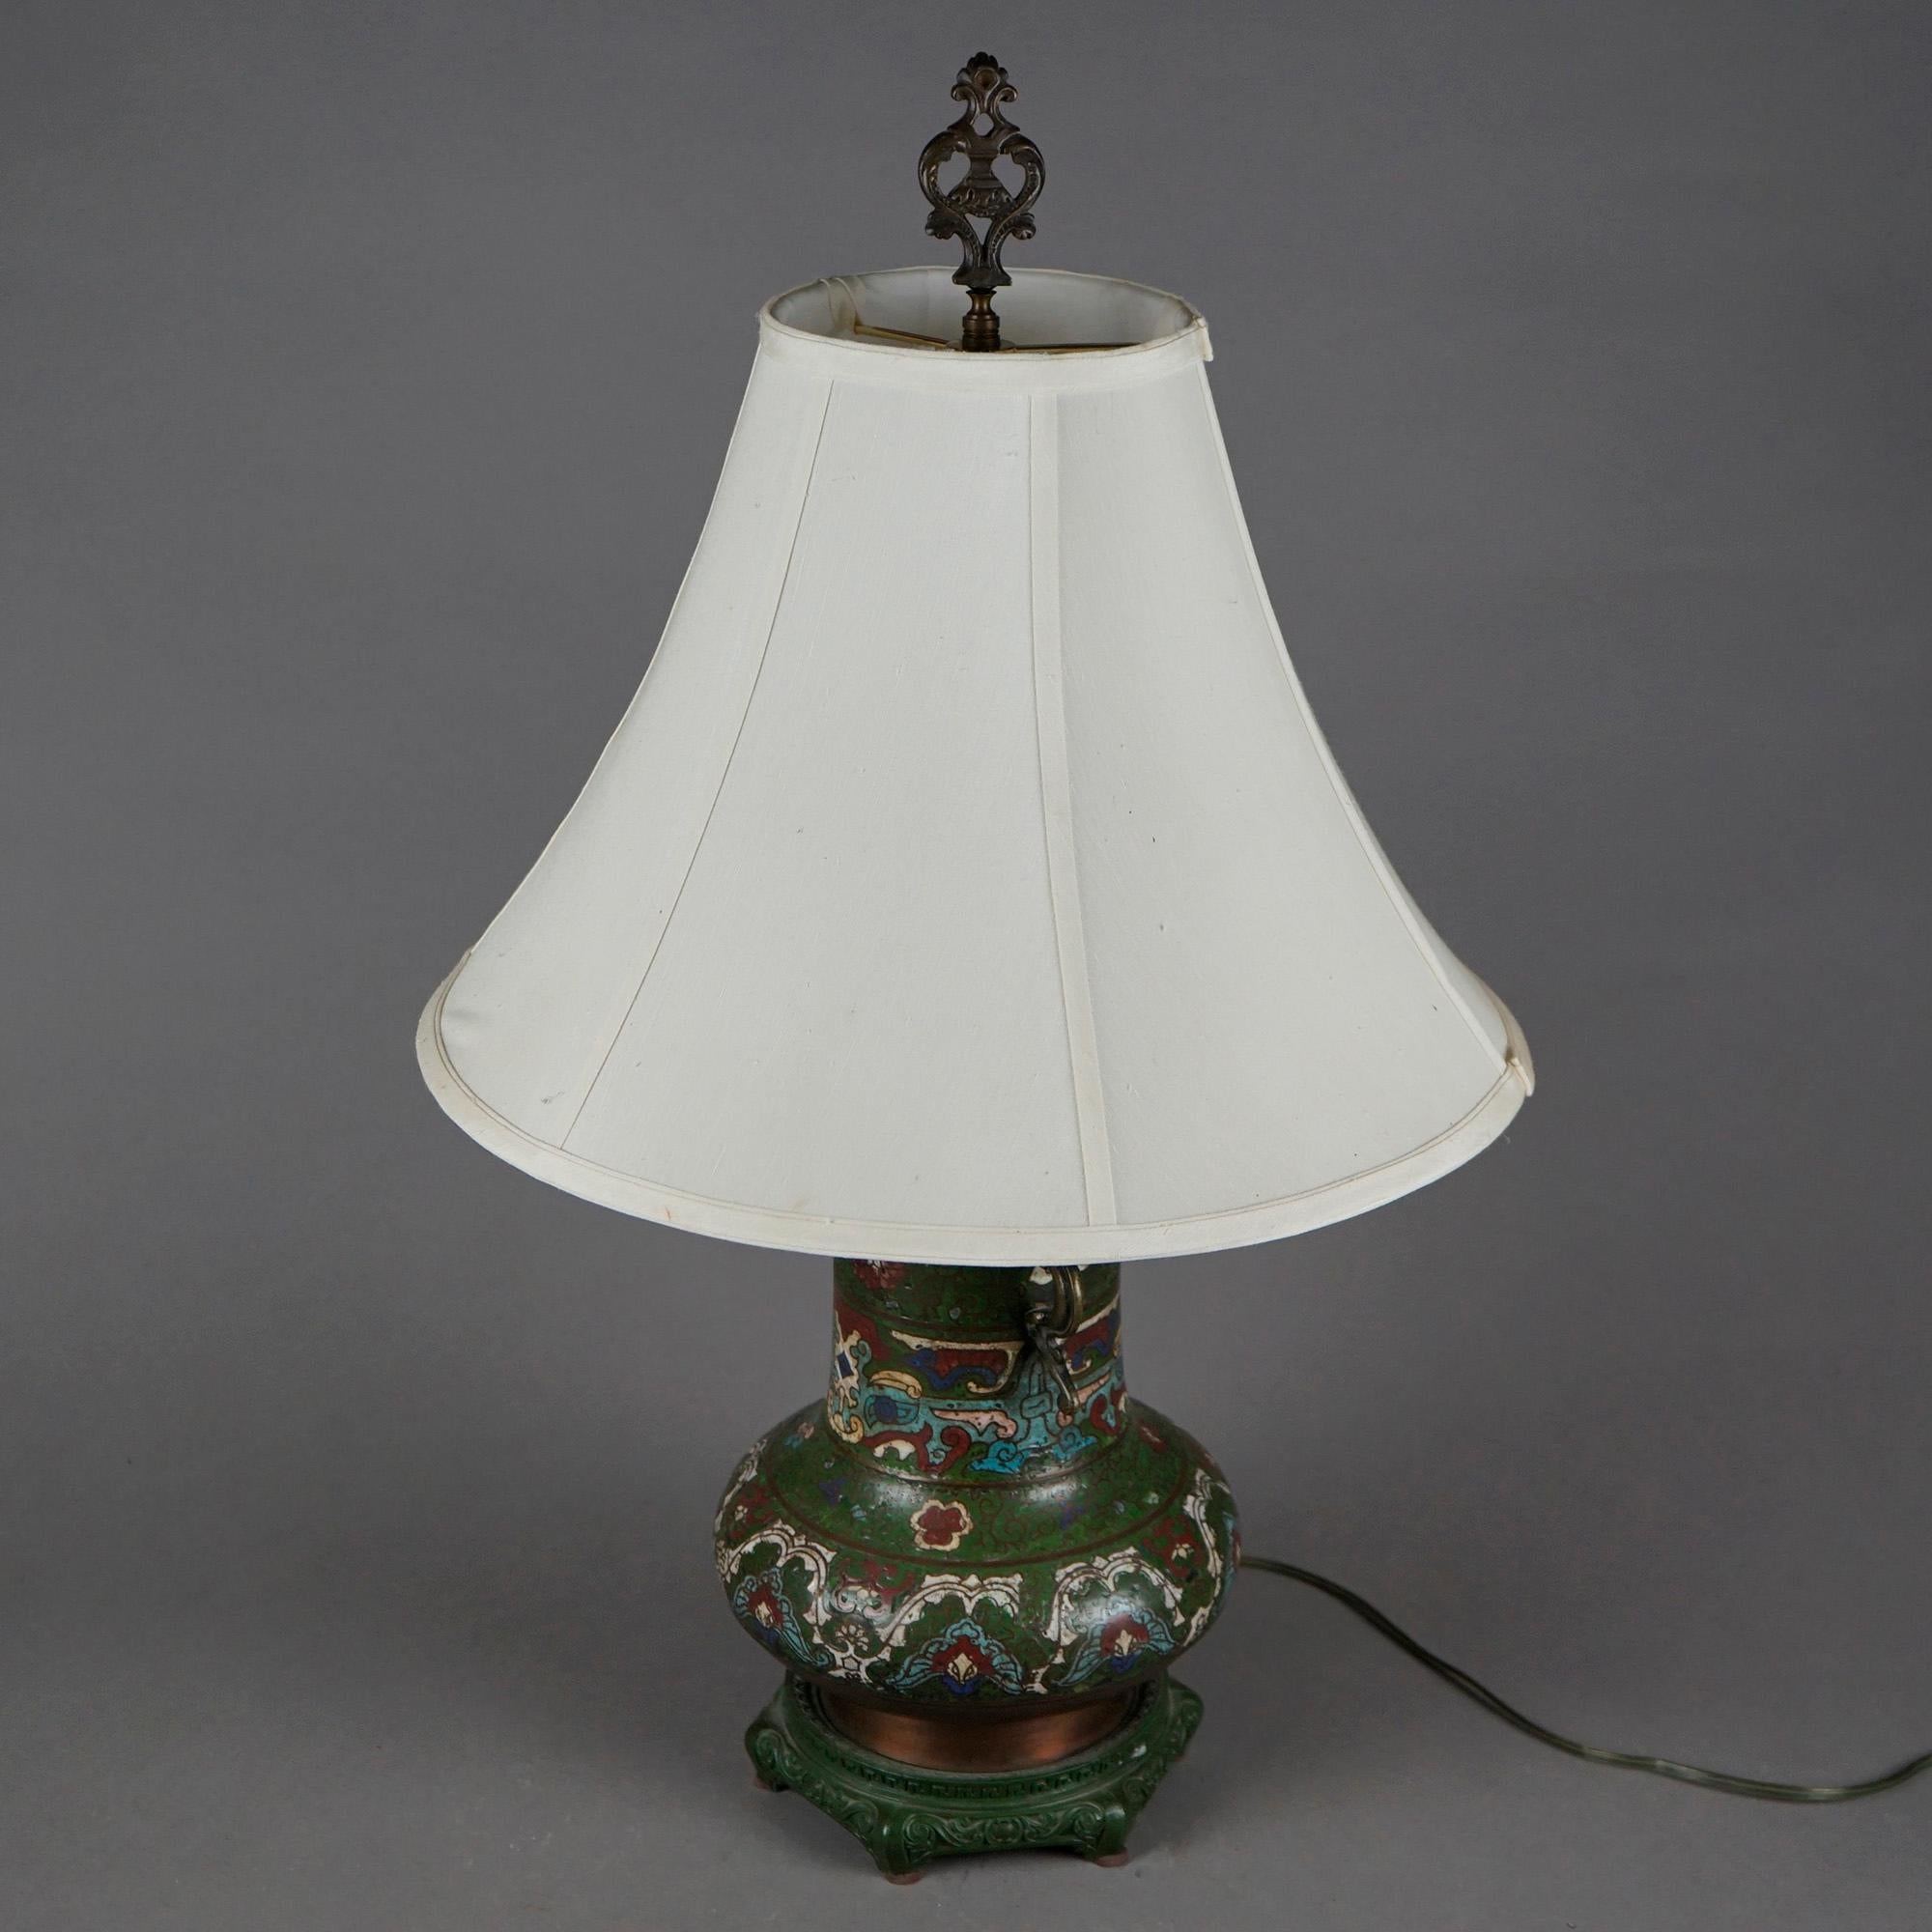 An antique double socket table lamp offers Chinese vase with Cloissone enameled allover garden design having flowers and cast figural dragon double handles, seated on carved hardwood base, wired for US electricity, c1920
 design

Measures- 27.5''H x